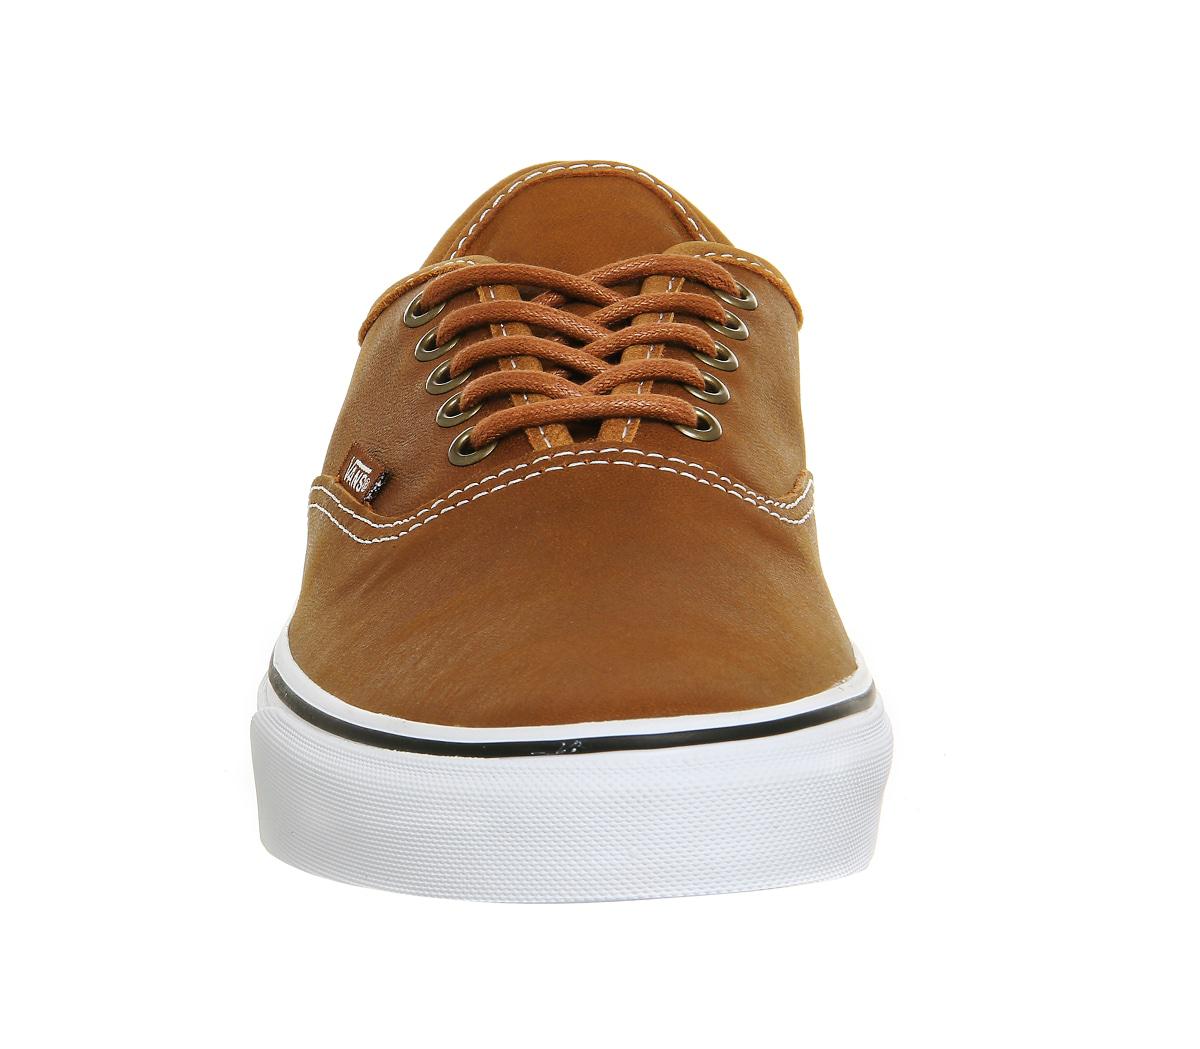 Lyst - Vans Authentic Leather in Brown for Men